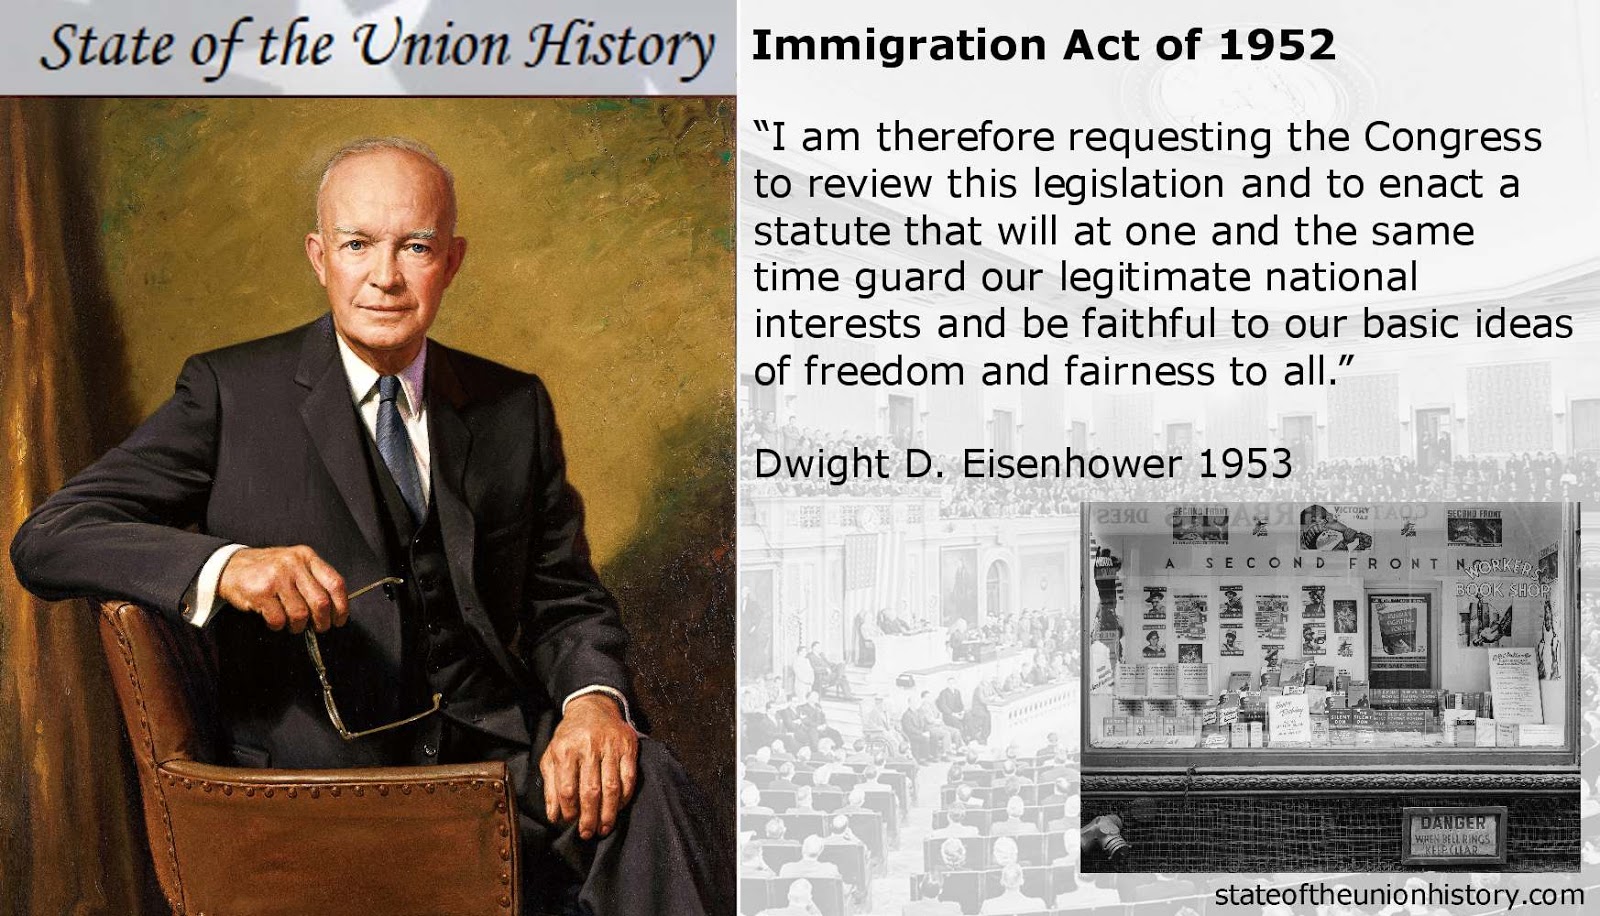 1953 Dwight D. Eisenhower - Immigration Act of 1952 | State of the Union History